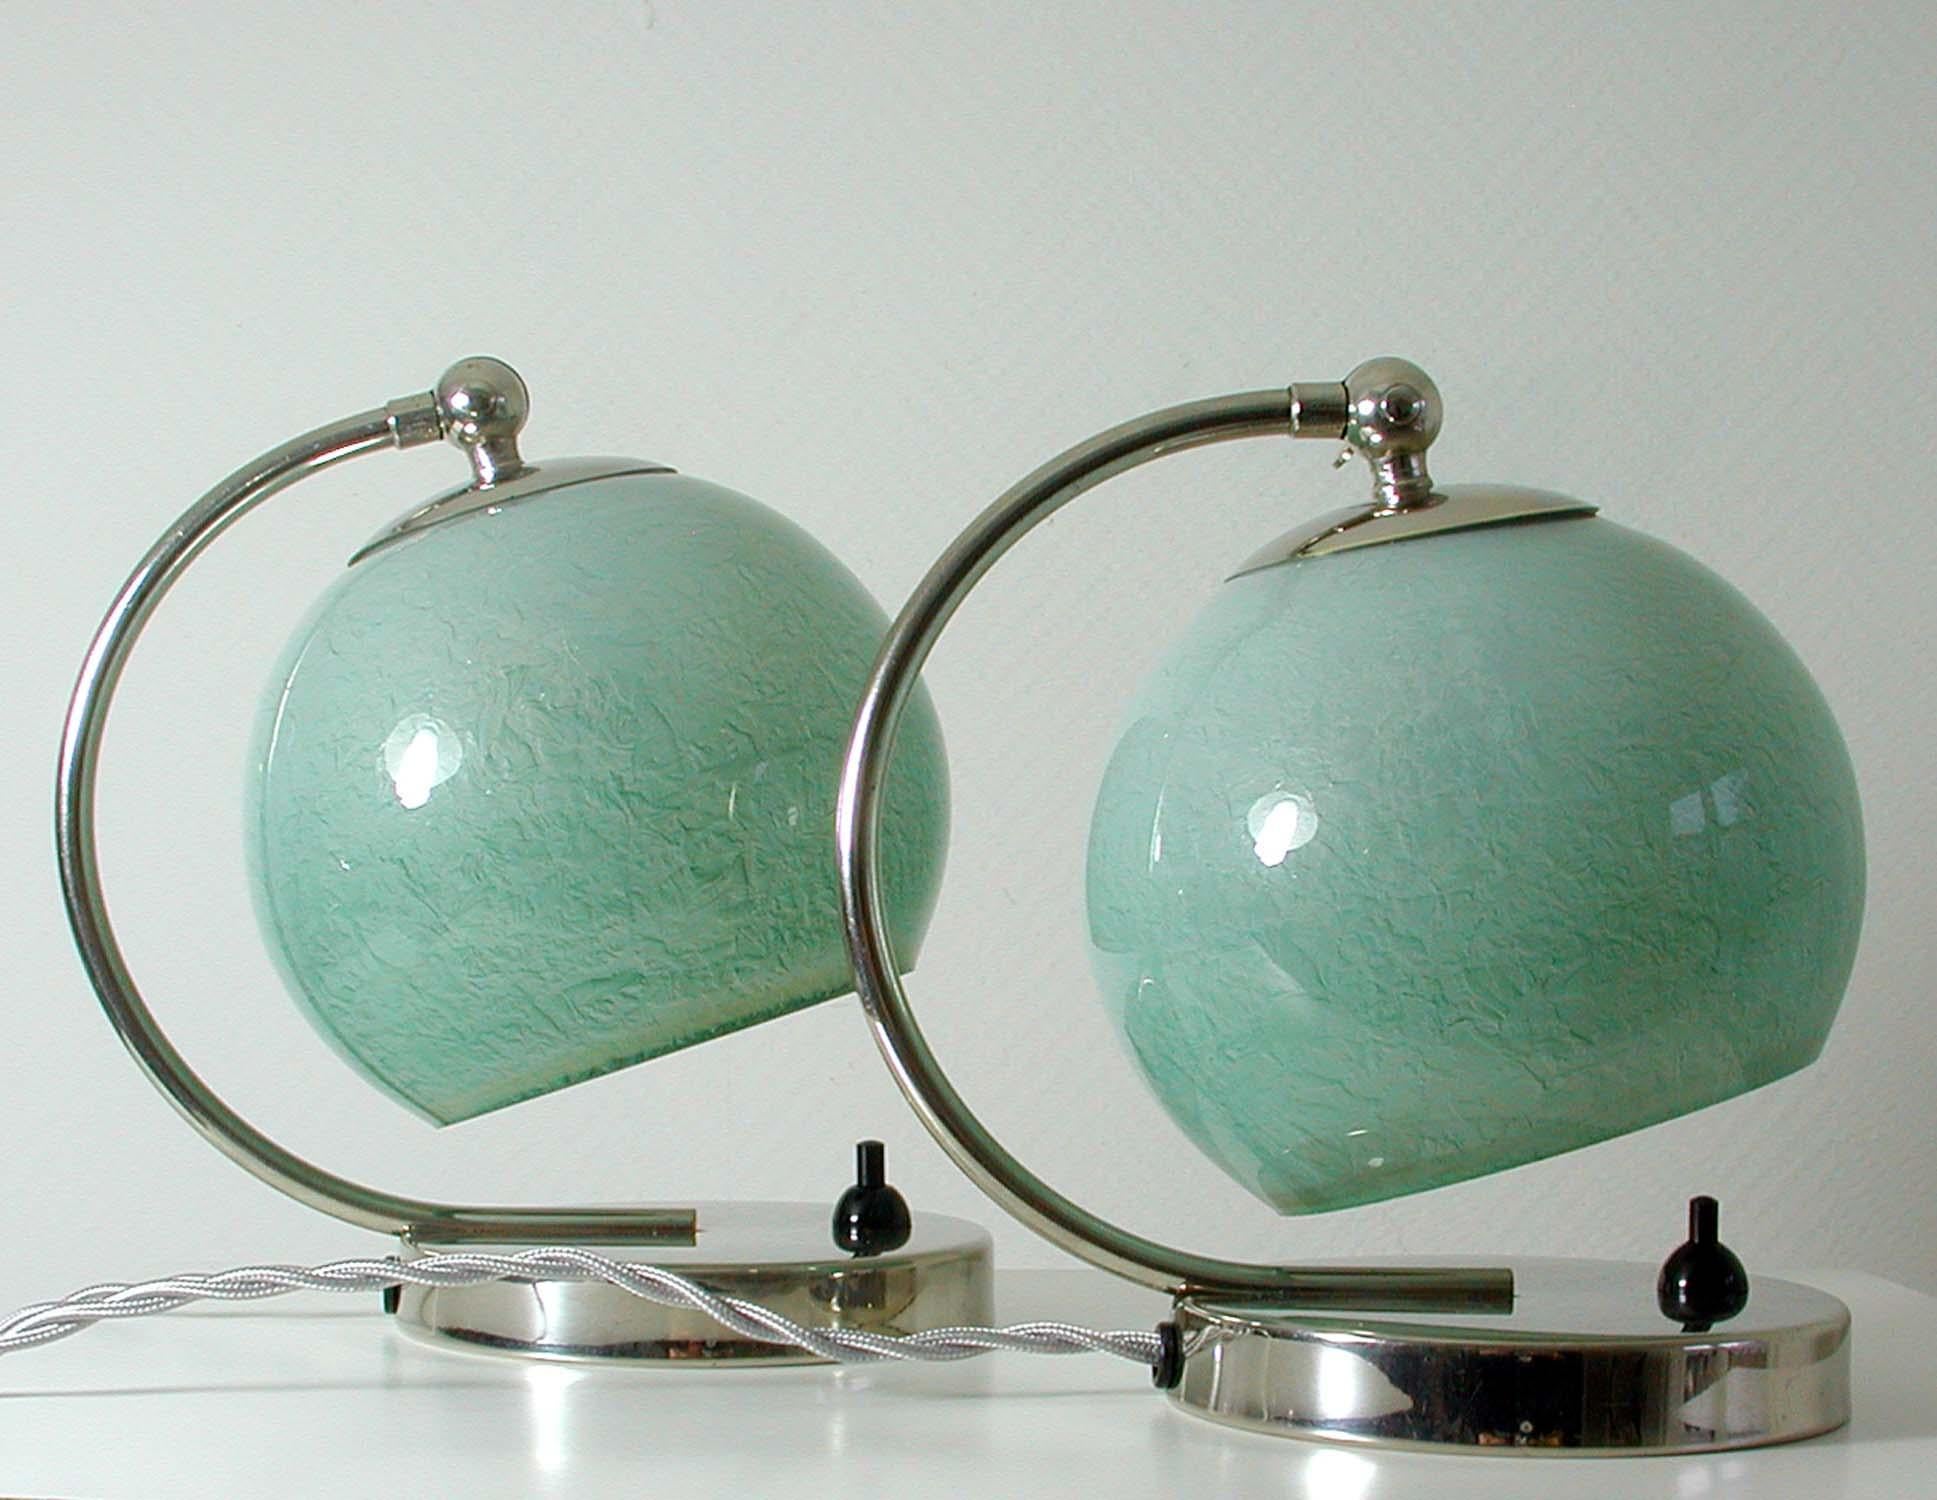 These table or bedside lamps were designed and manufactured in Germany in the 1930s during the Bauhaus period. They are made of chrome and have got mint colored / light greenish-blue opal glass lamp shades.
They can be used as table lights as well